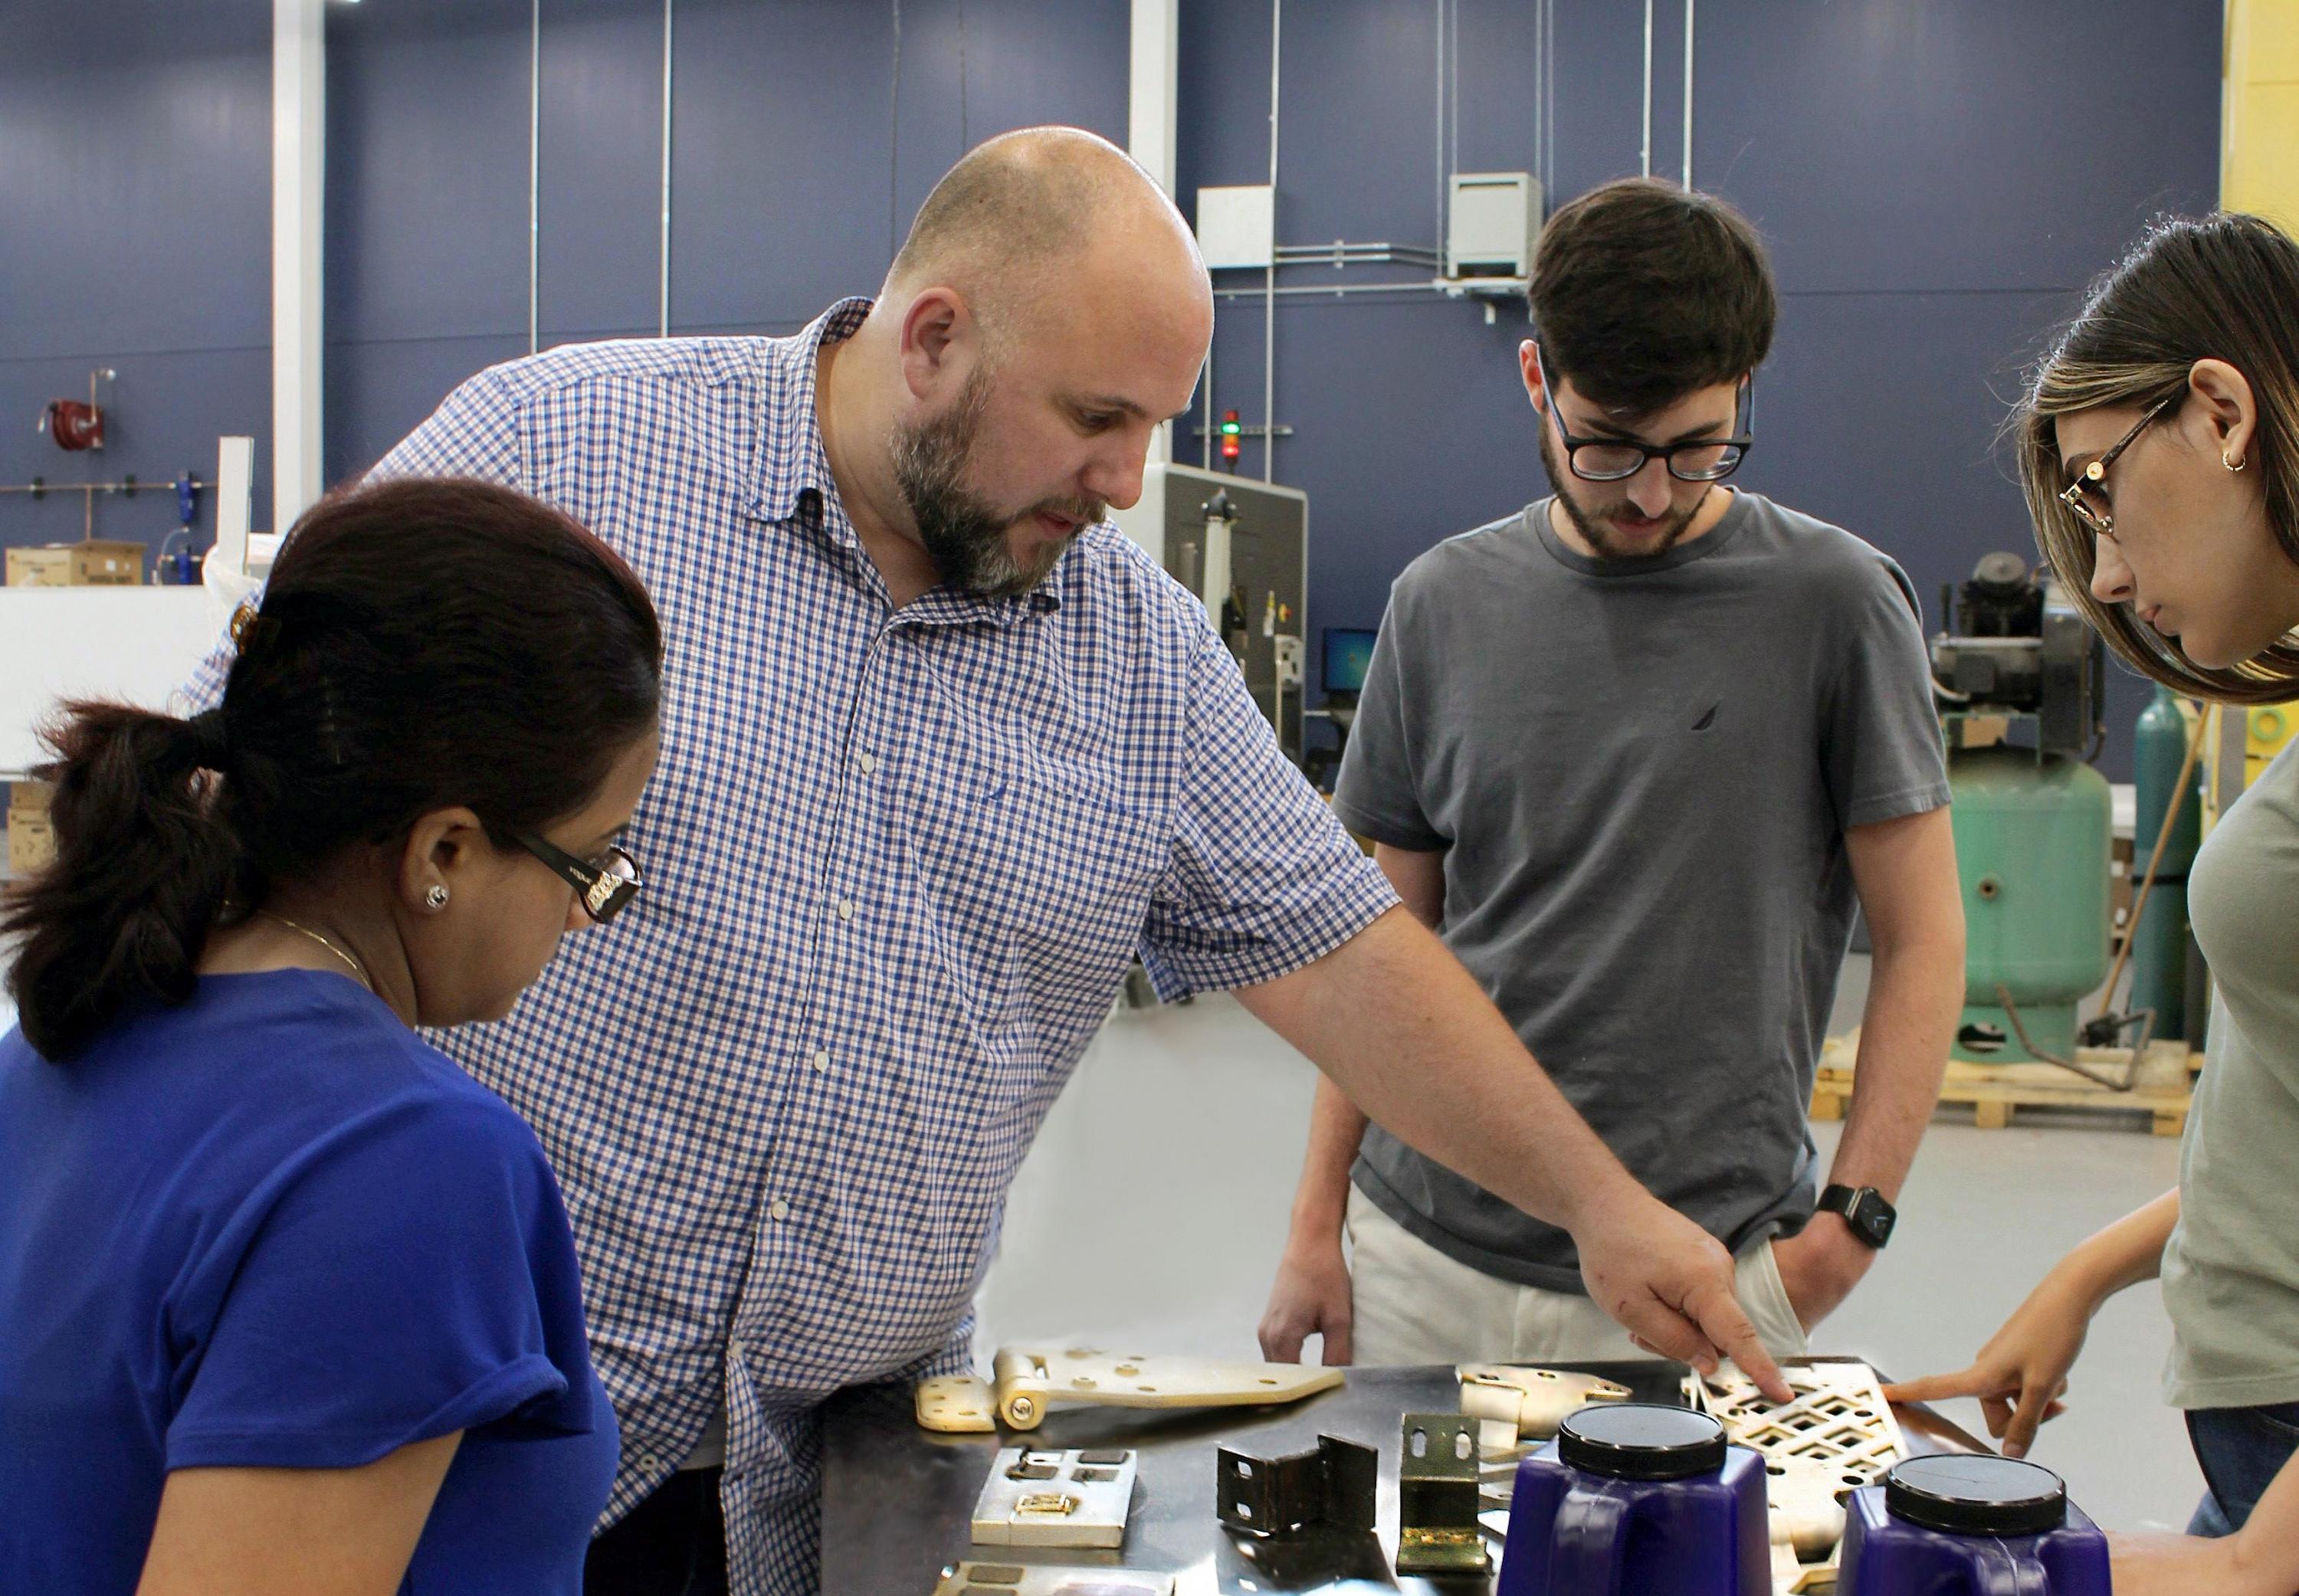 Aaron Stebner (second from left), associate professor in the College of Engineering, leads a lab session with students in the Delta Air Lines Advanced Manufacturing Pilot Facility at Georgia Tech. (Photo: Christa M. Ernst)